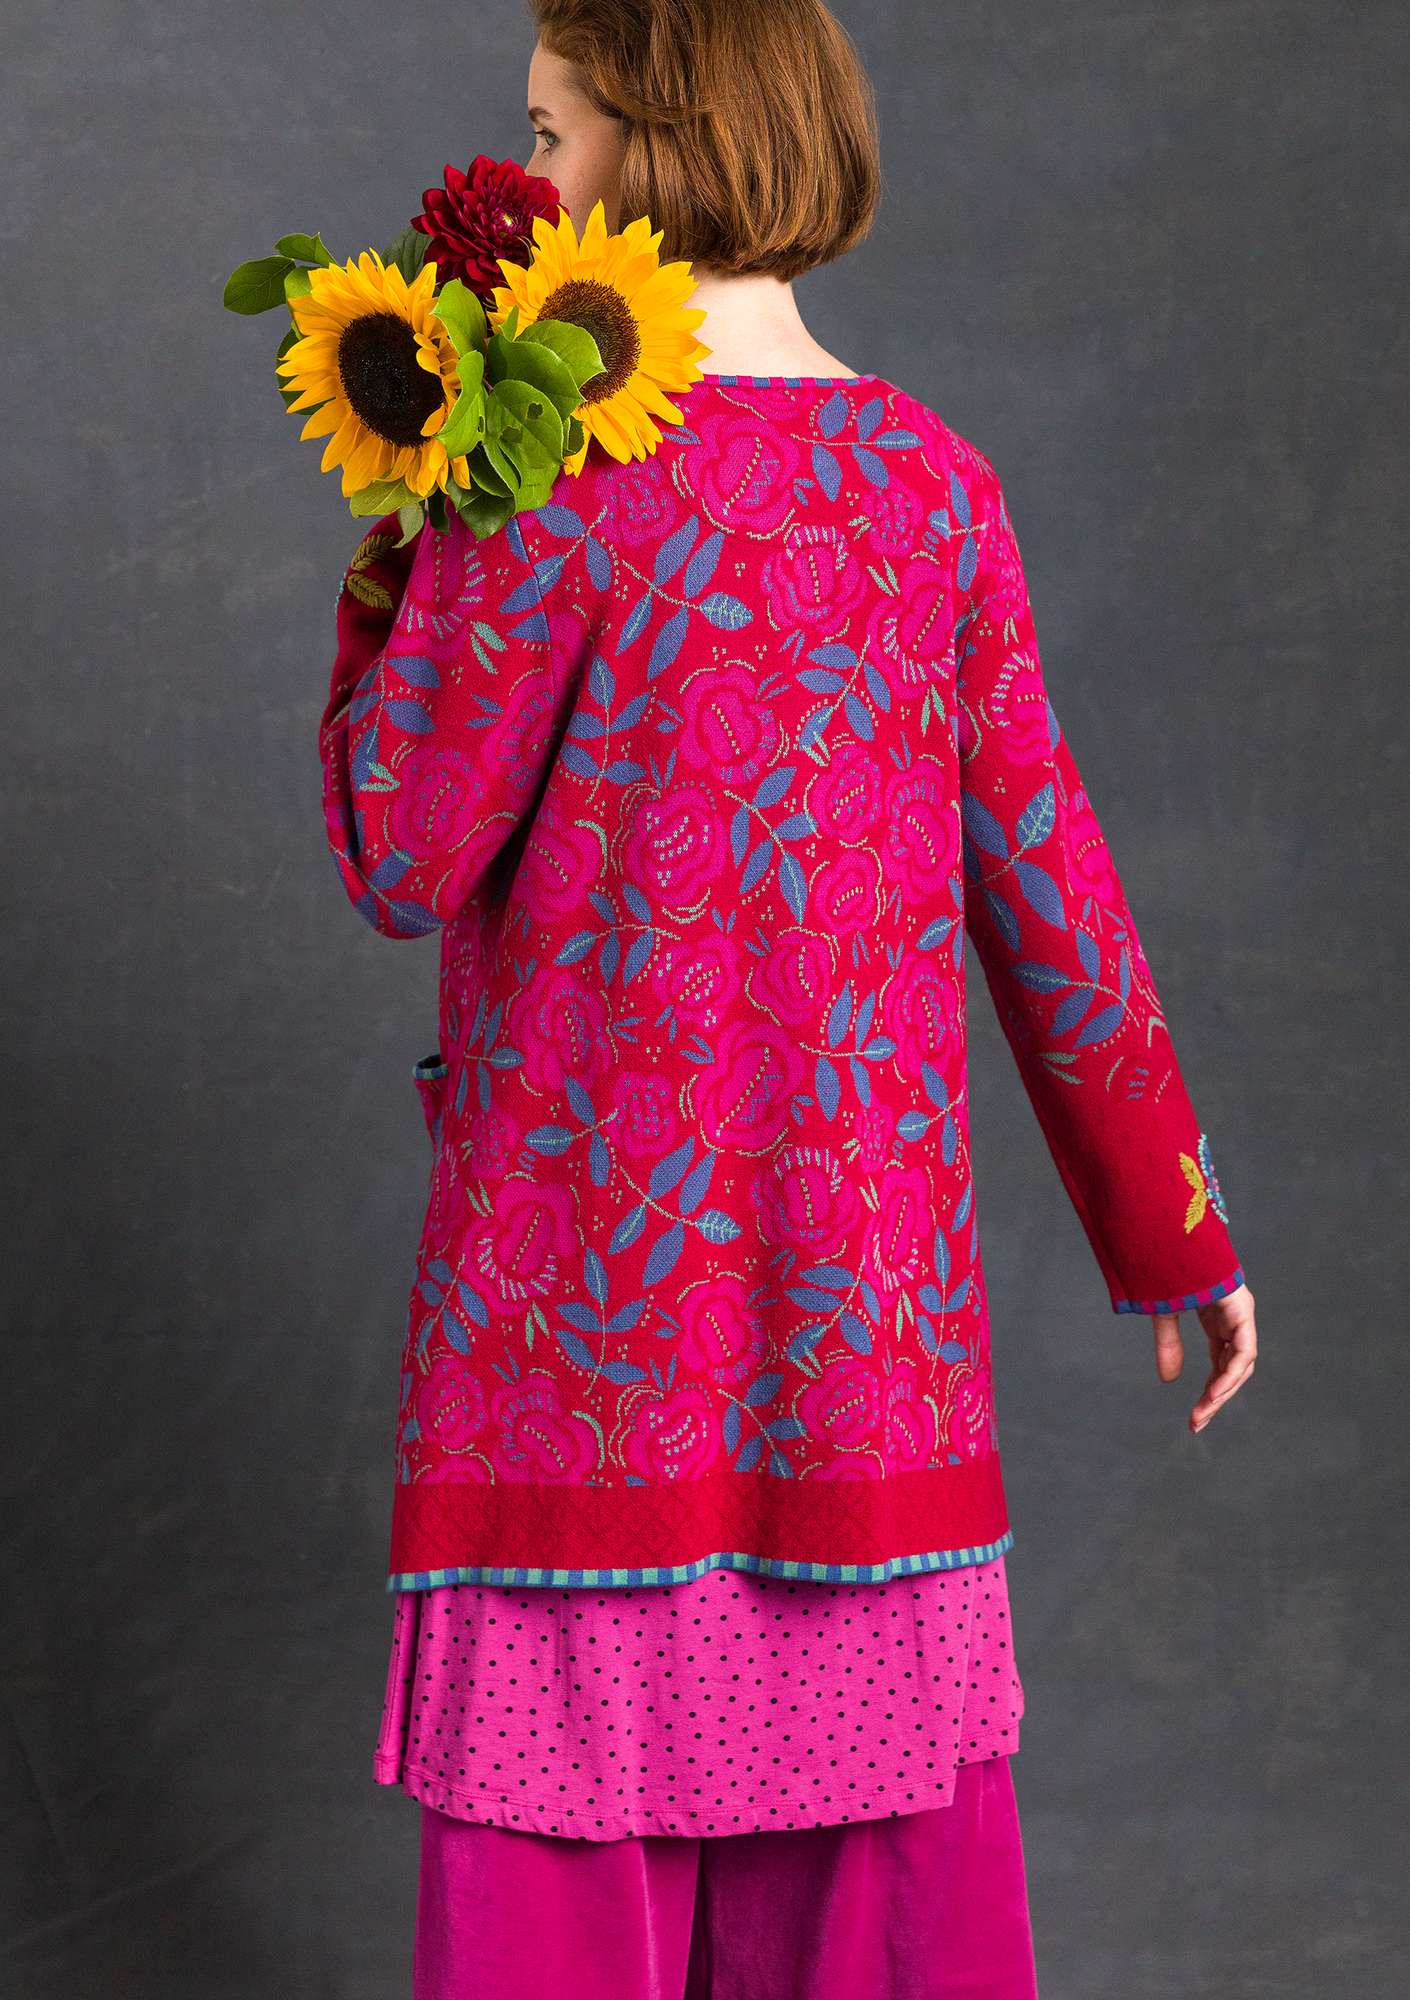 Hand-embroidered “China Rose” cardigan in wool/organic cotton cranberry